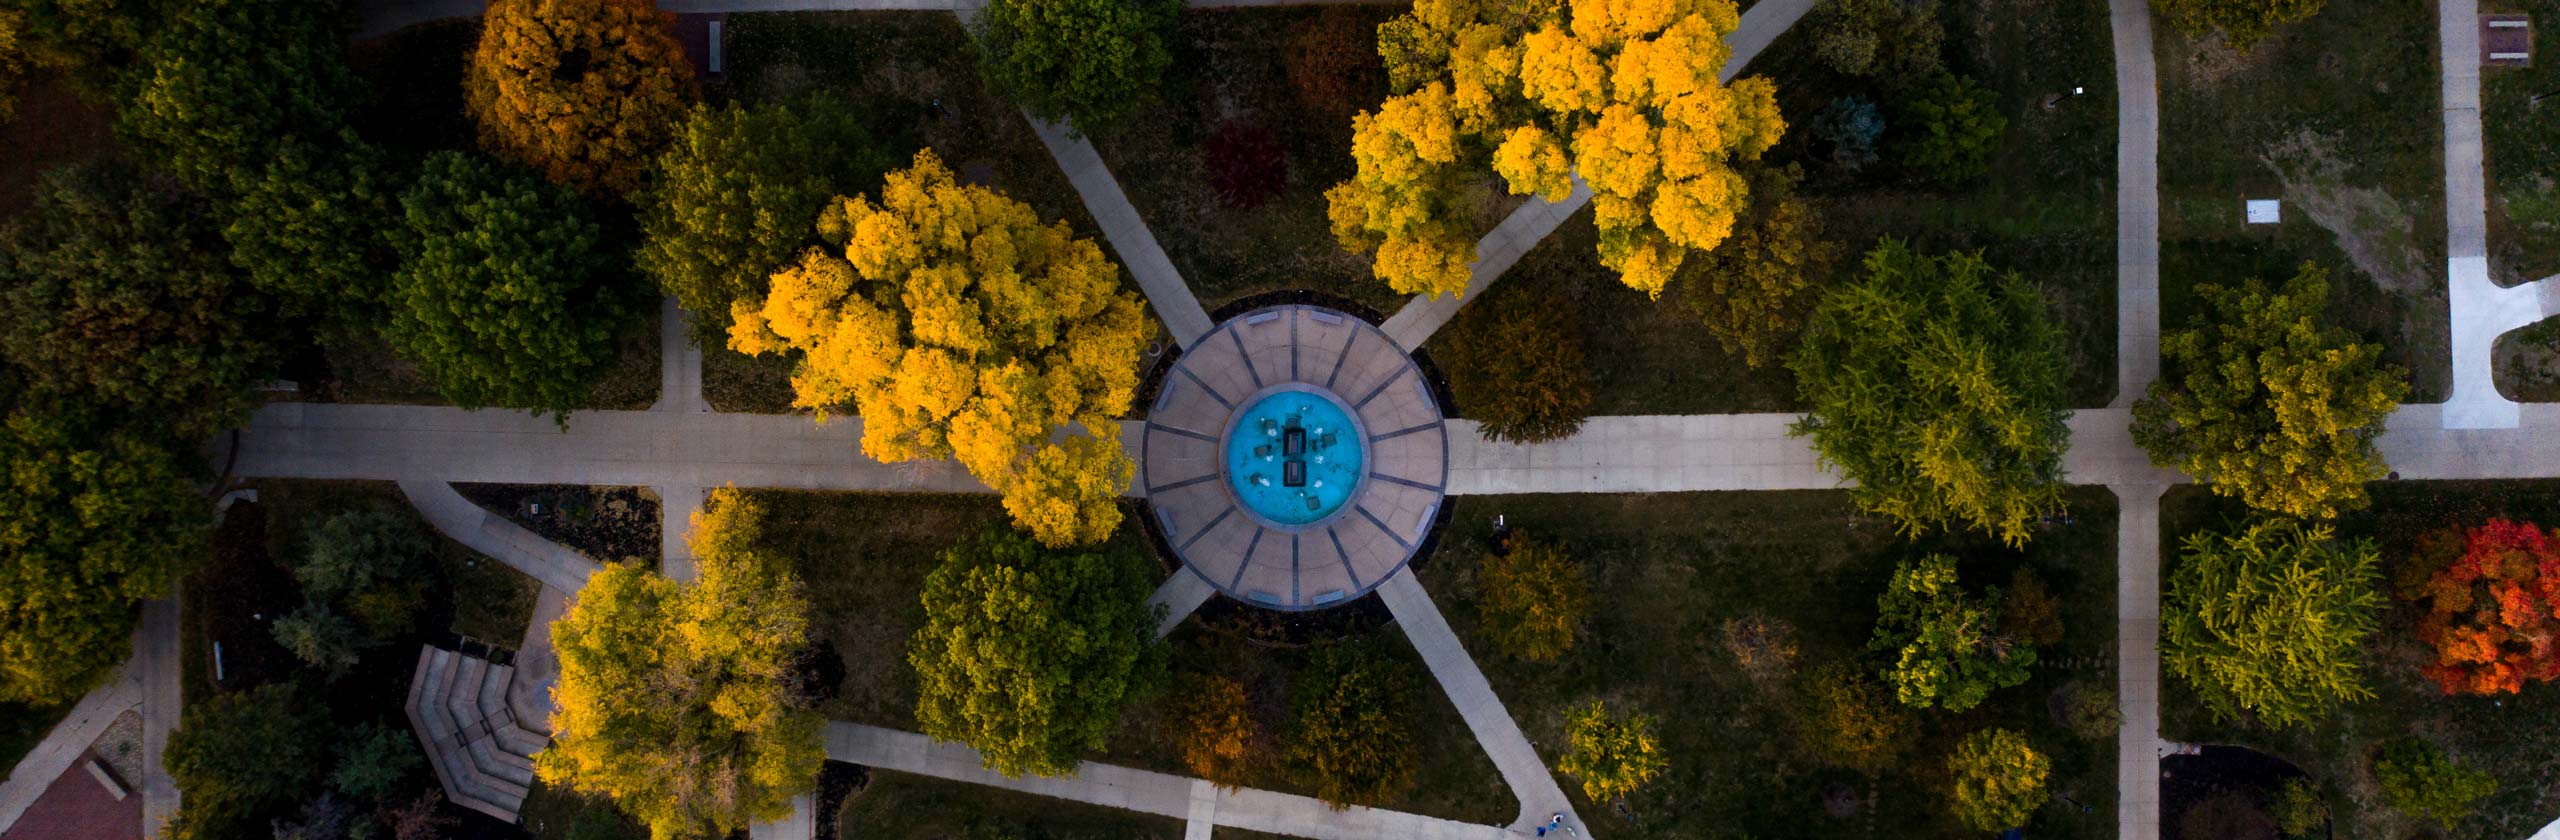 Drone Image Over Campus in Fall